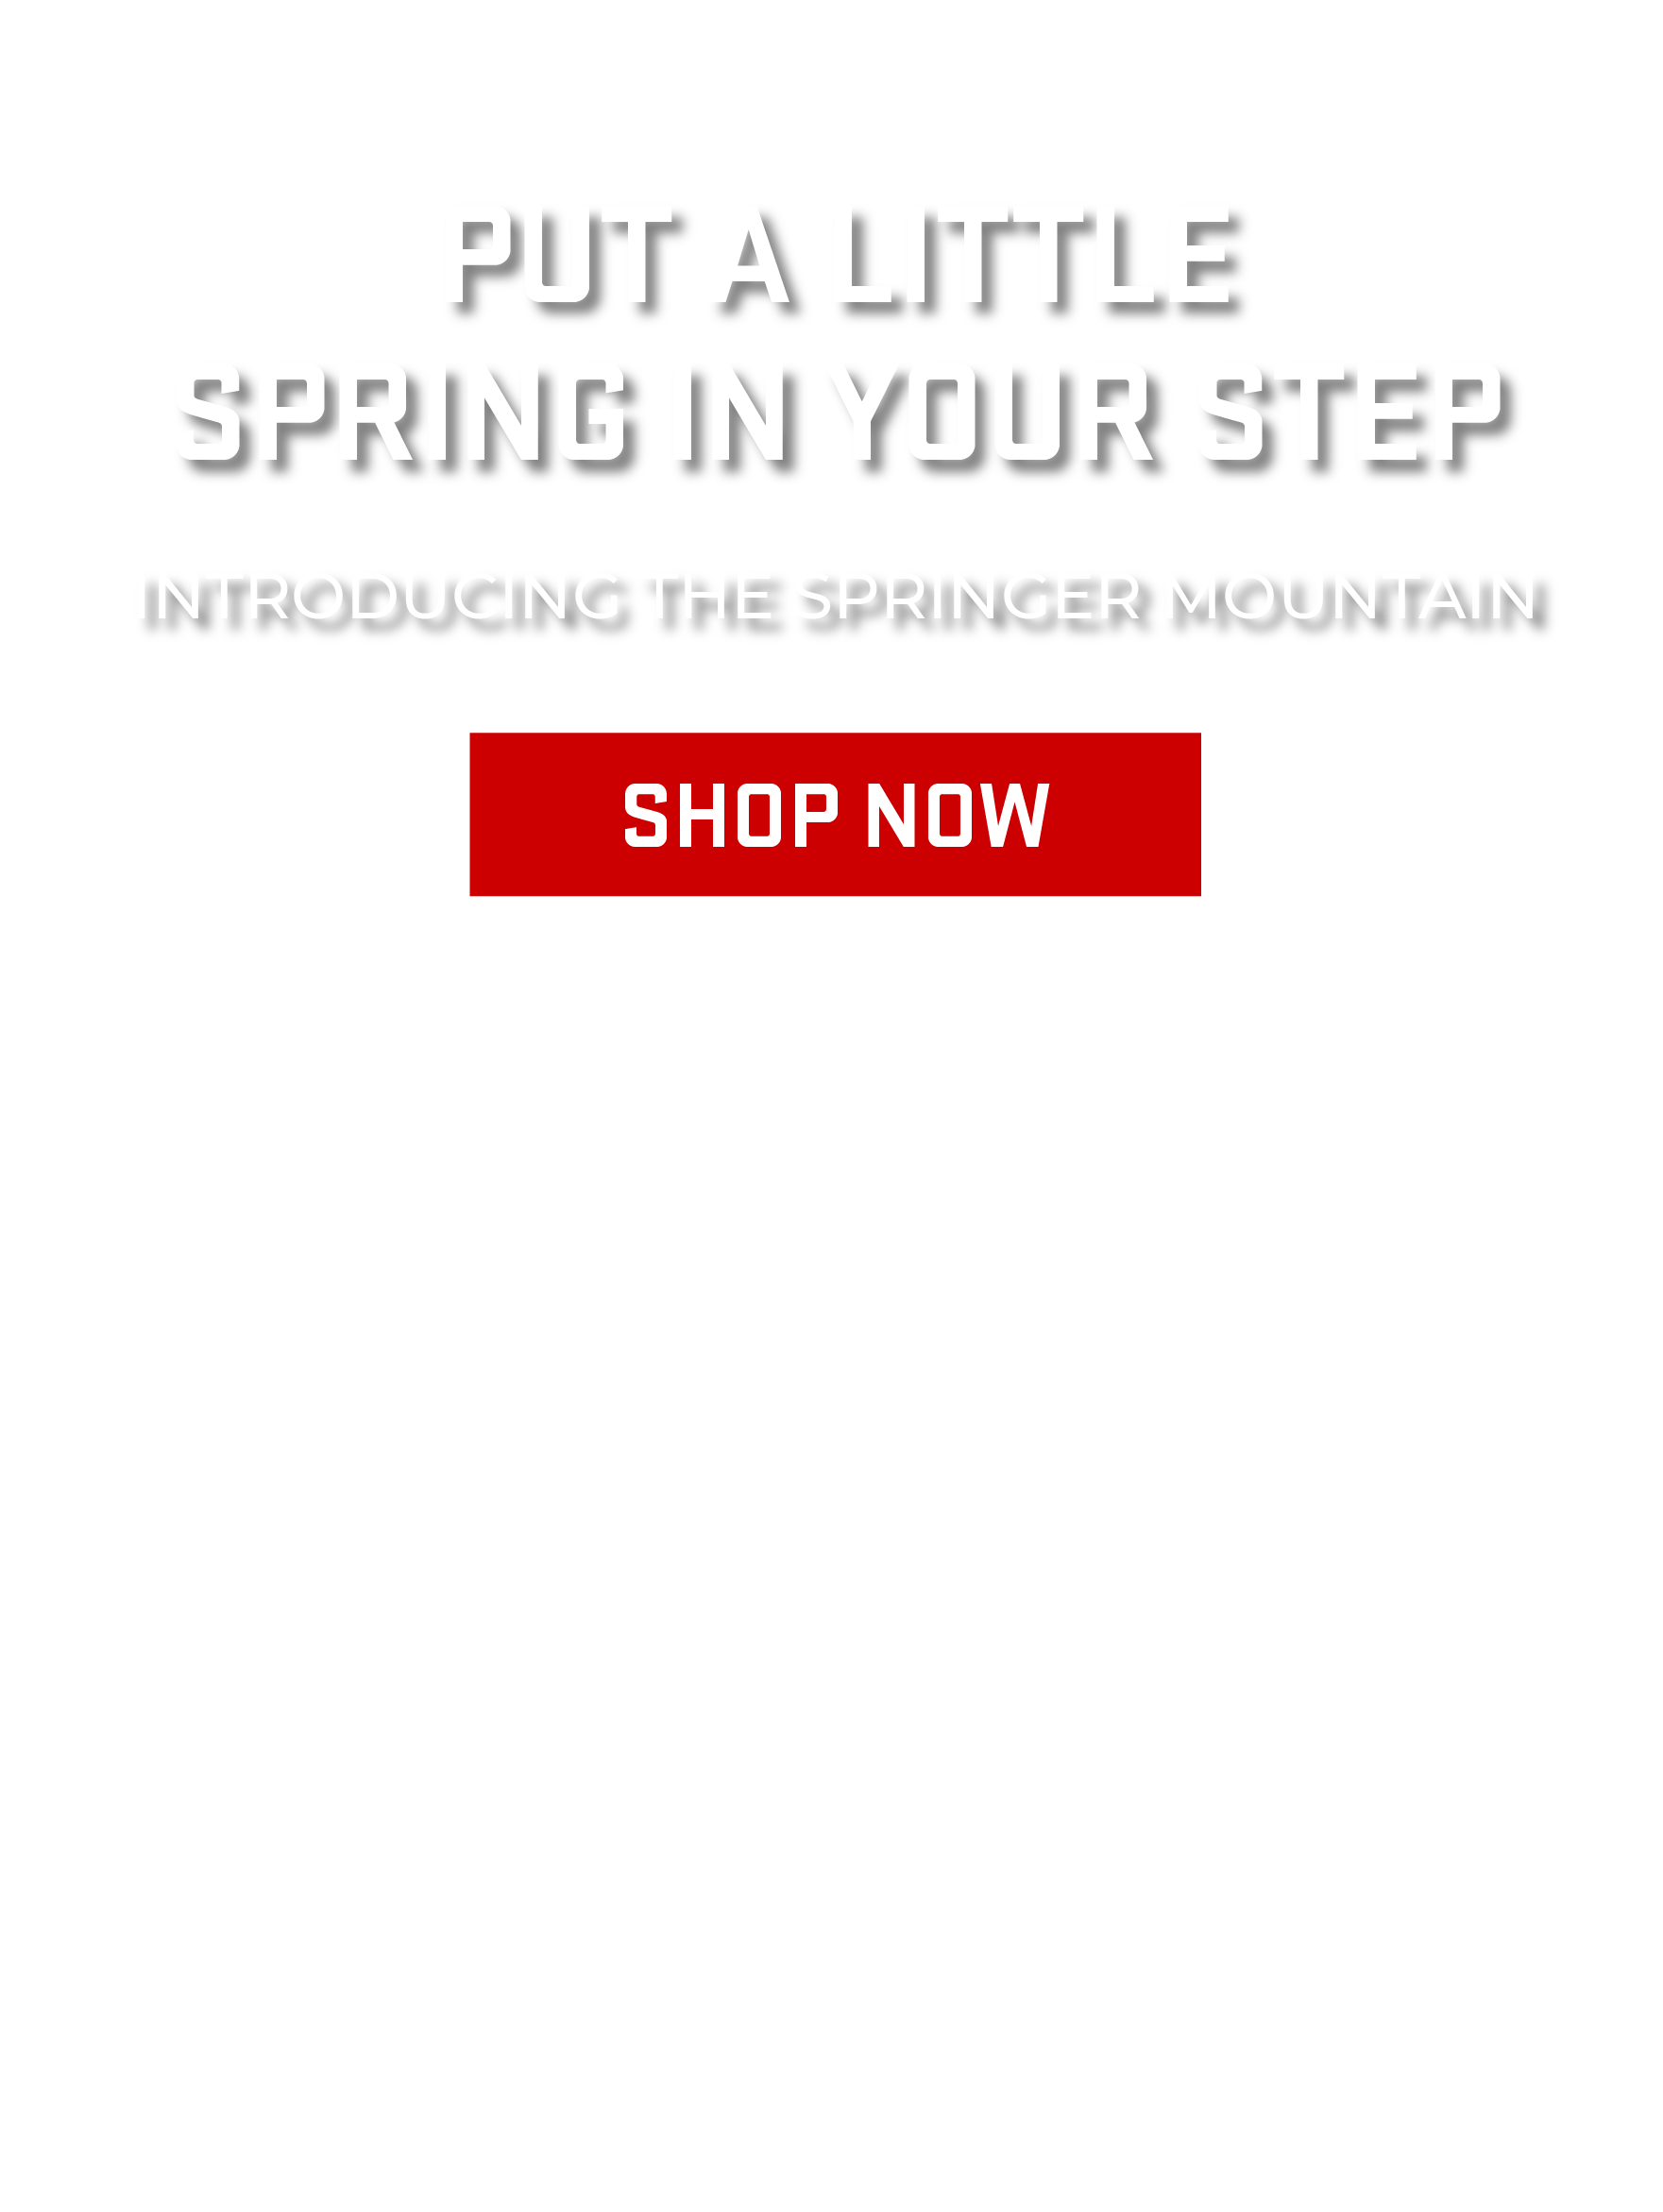 Put a Little Spring In Your Step - Introducing the Spring Mountain > Shop Now